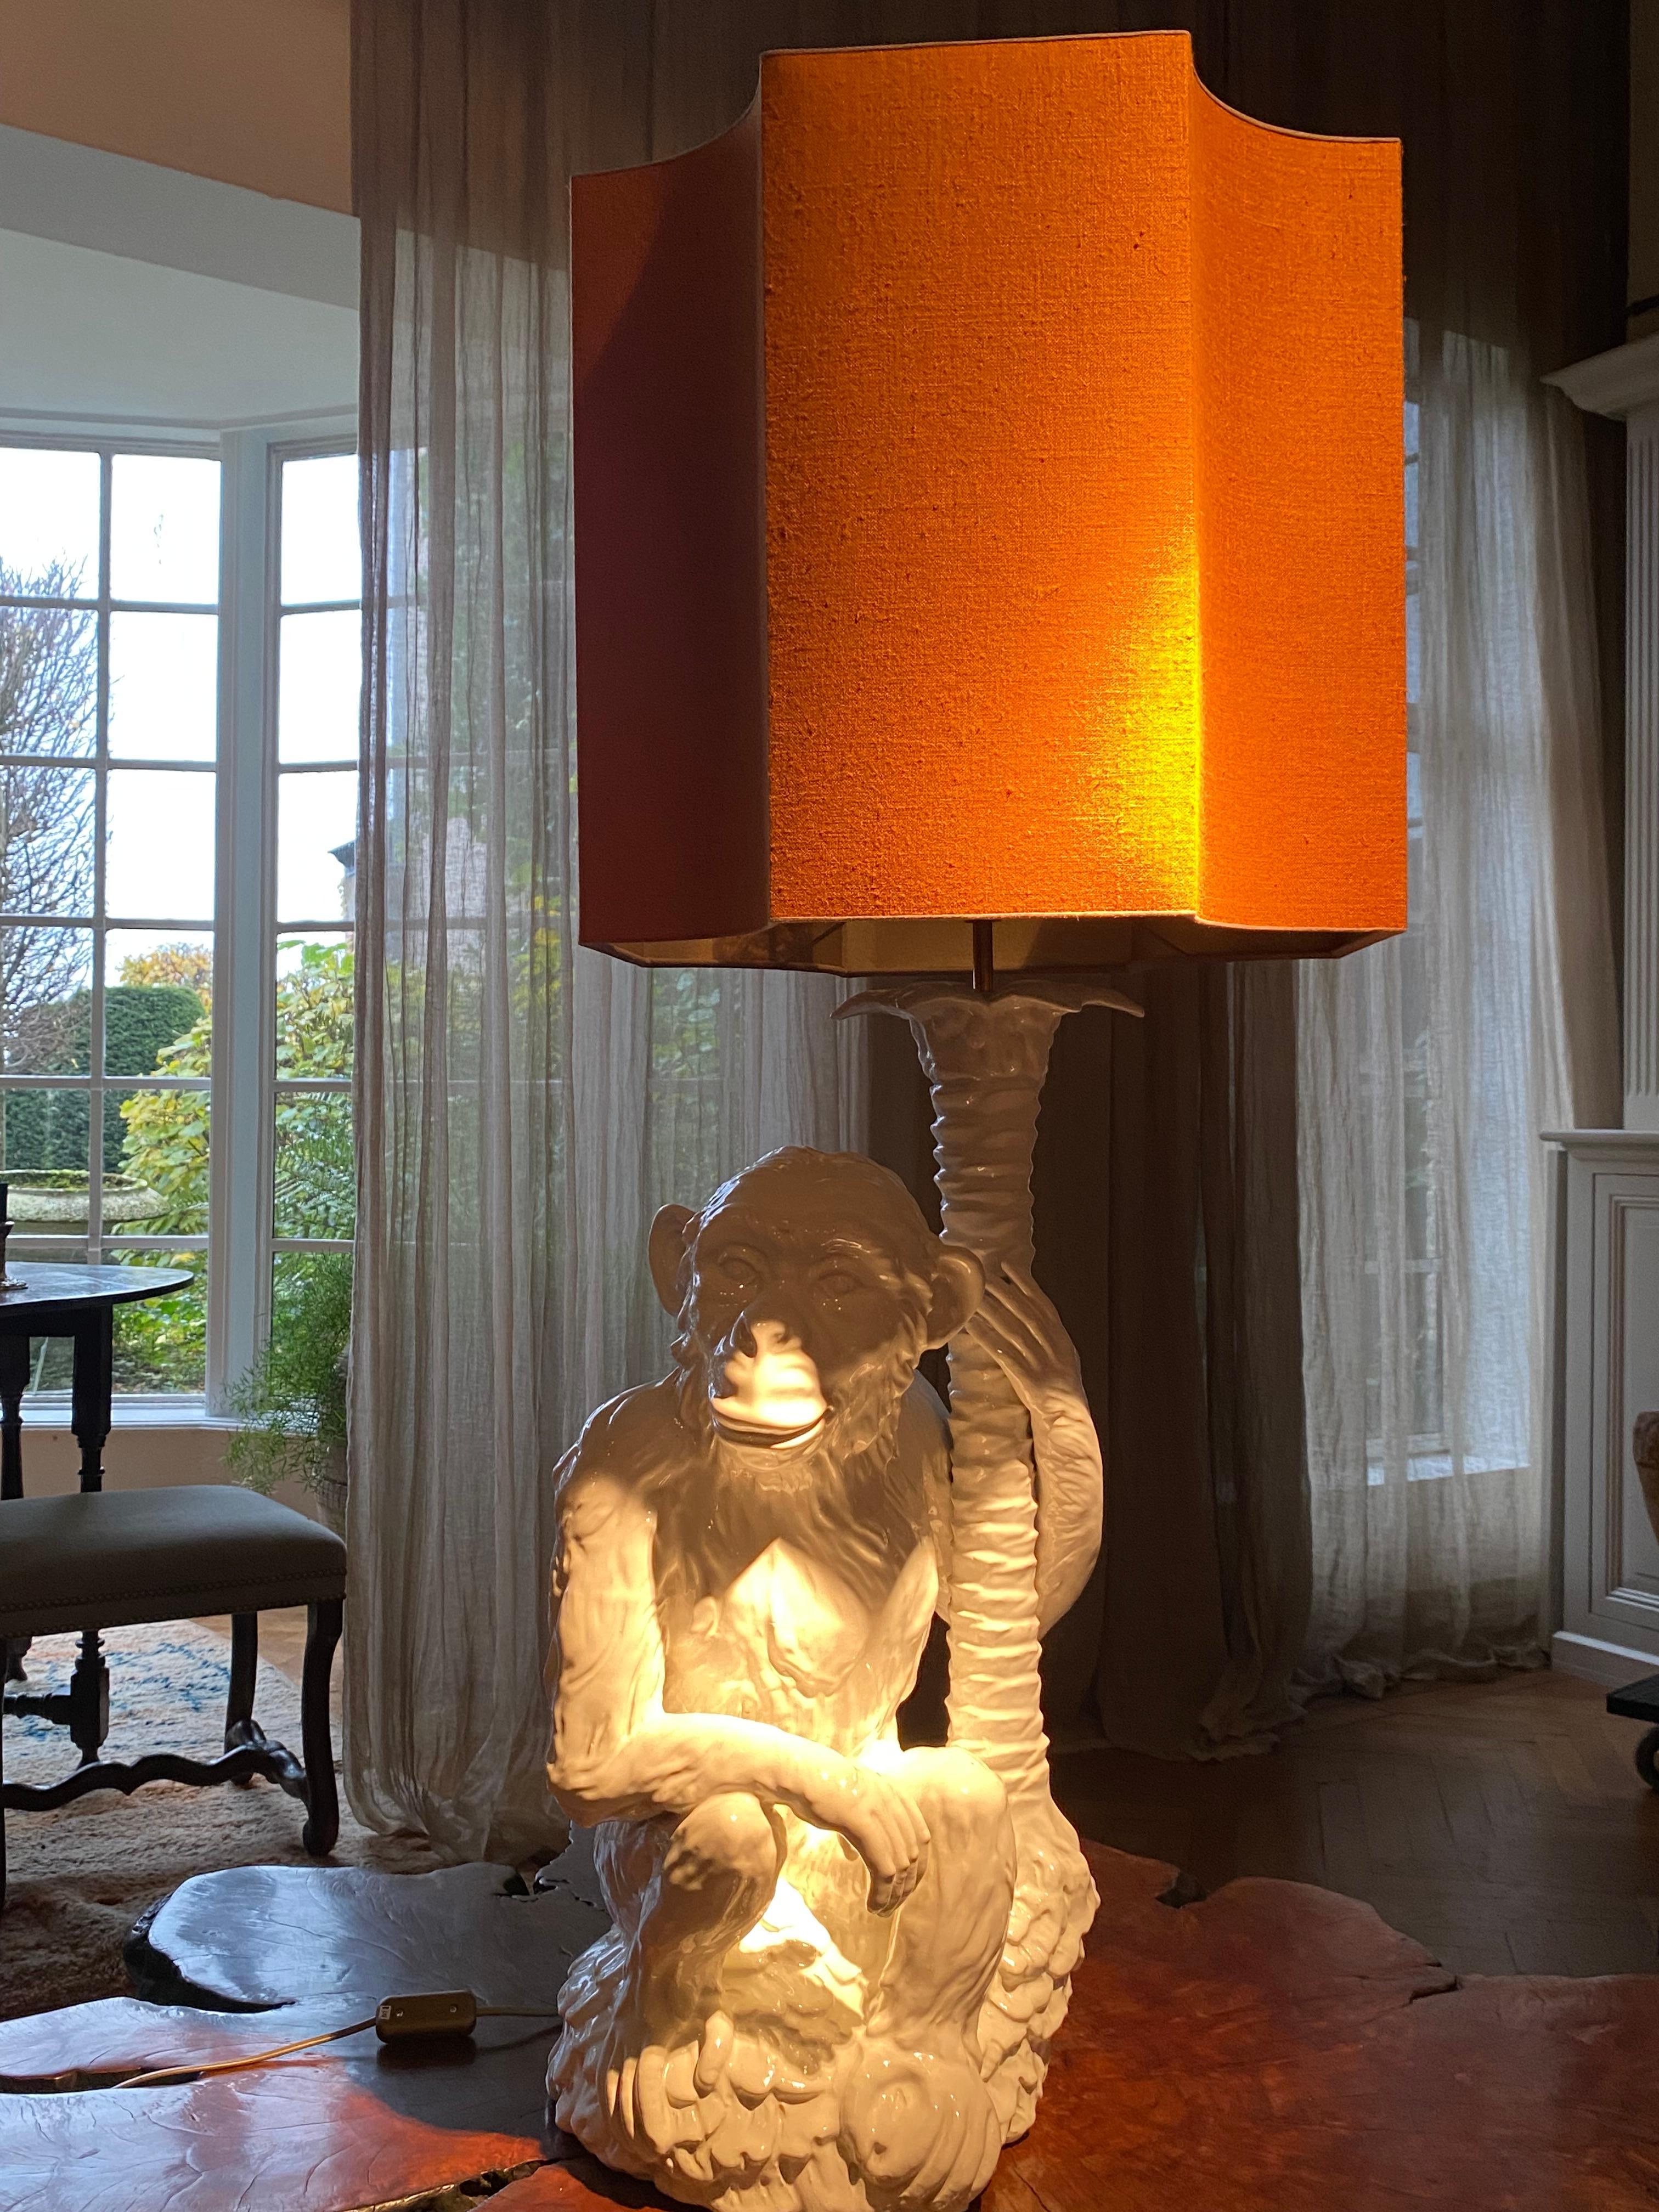 Exceptional Tablelamp, Monkey seated at a tree,
White Porcelain in a mint condition,
very decorative object,
new shade made in an Orange Fabric,
Shade is 45 cm high x 43 cm wide and 43 cm deep